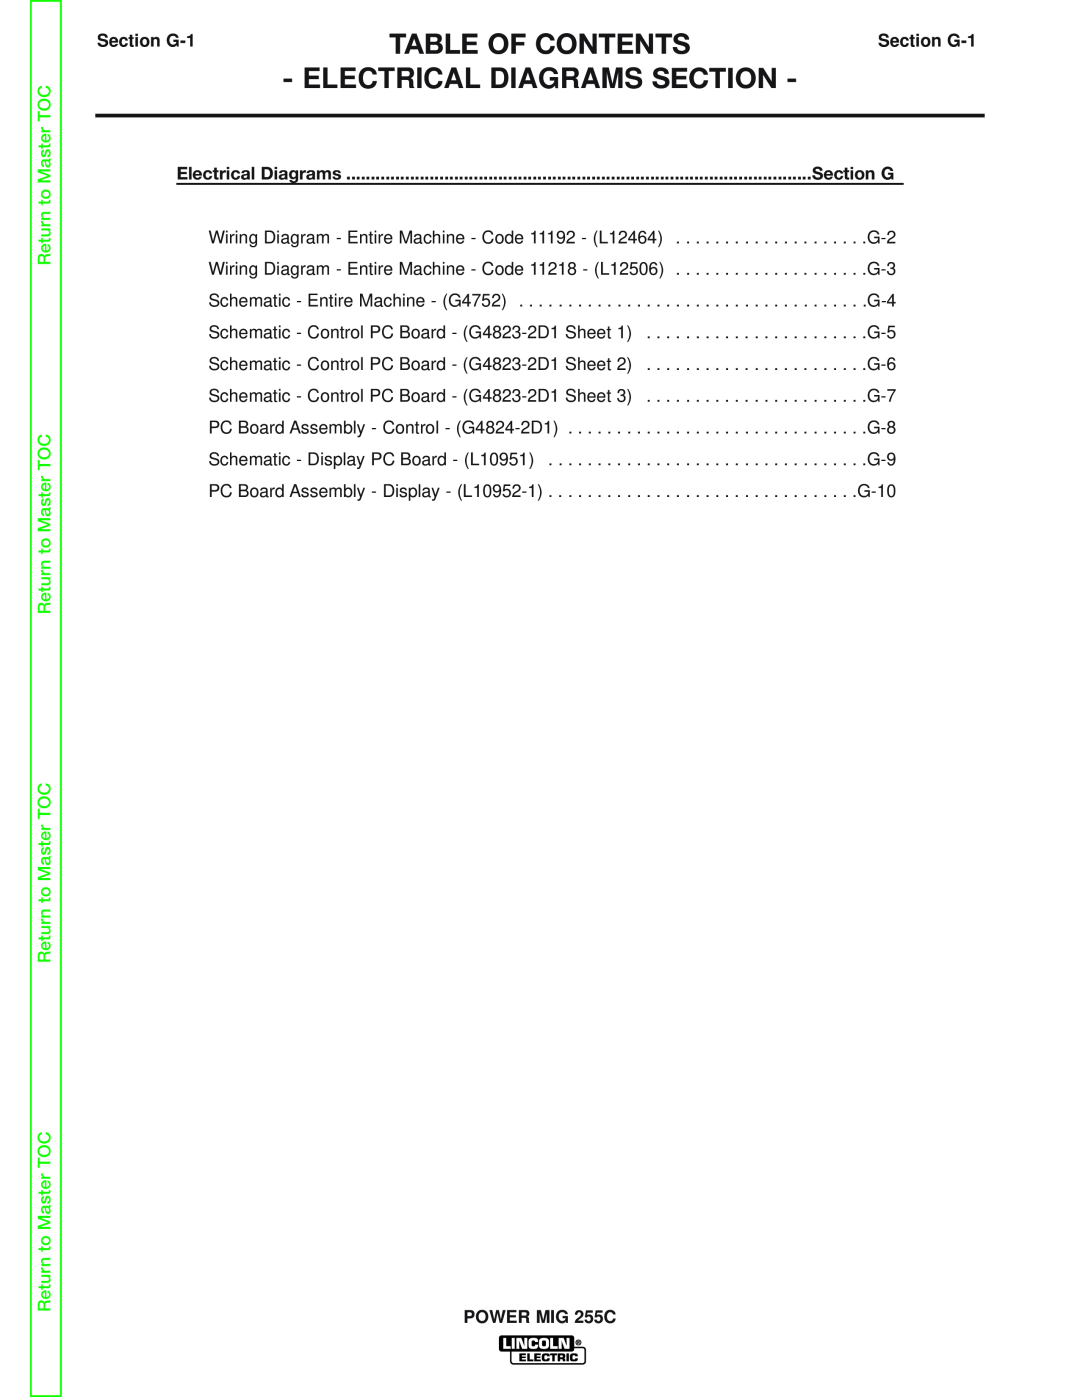 Lincoln Electric SVM170-A service manual Table Of Contents, Electrical Diagrams Section, Return to Master TOC, Section G 